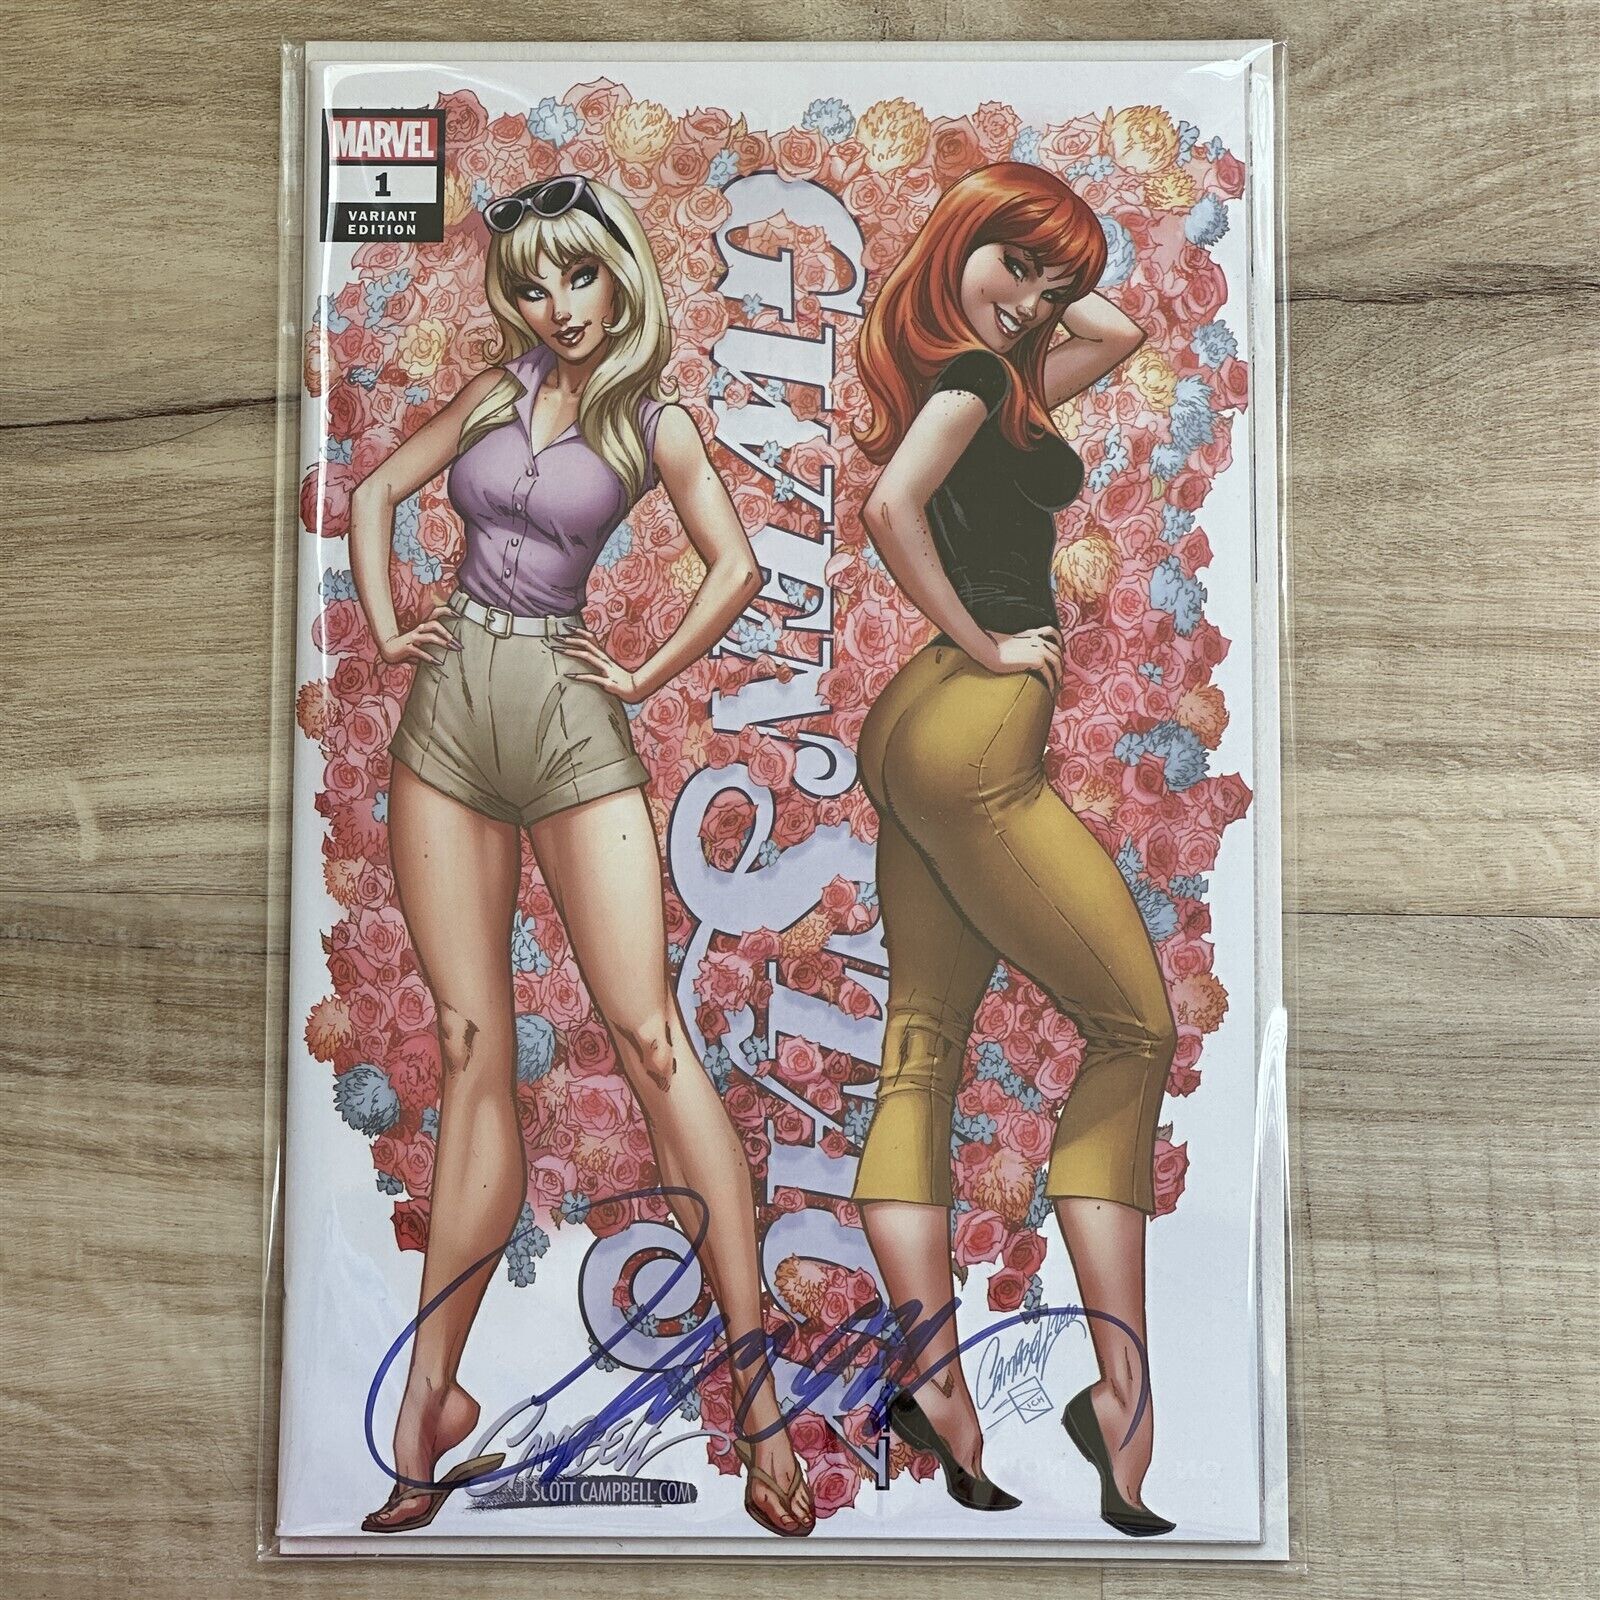 GWEN STACY #1 2020 J SCOTT CAMPBELL VARIANT B EXCLUSIVE SUMMER FASHION COVER GGA